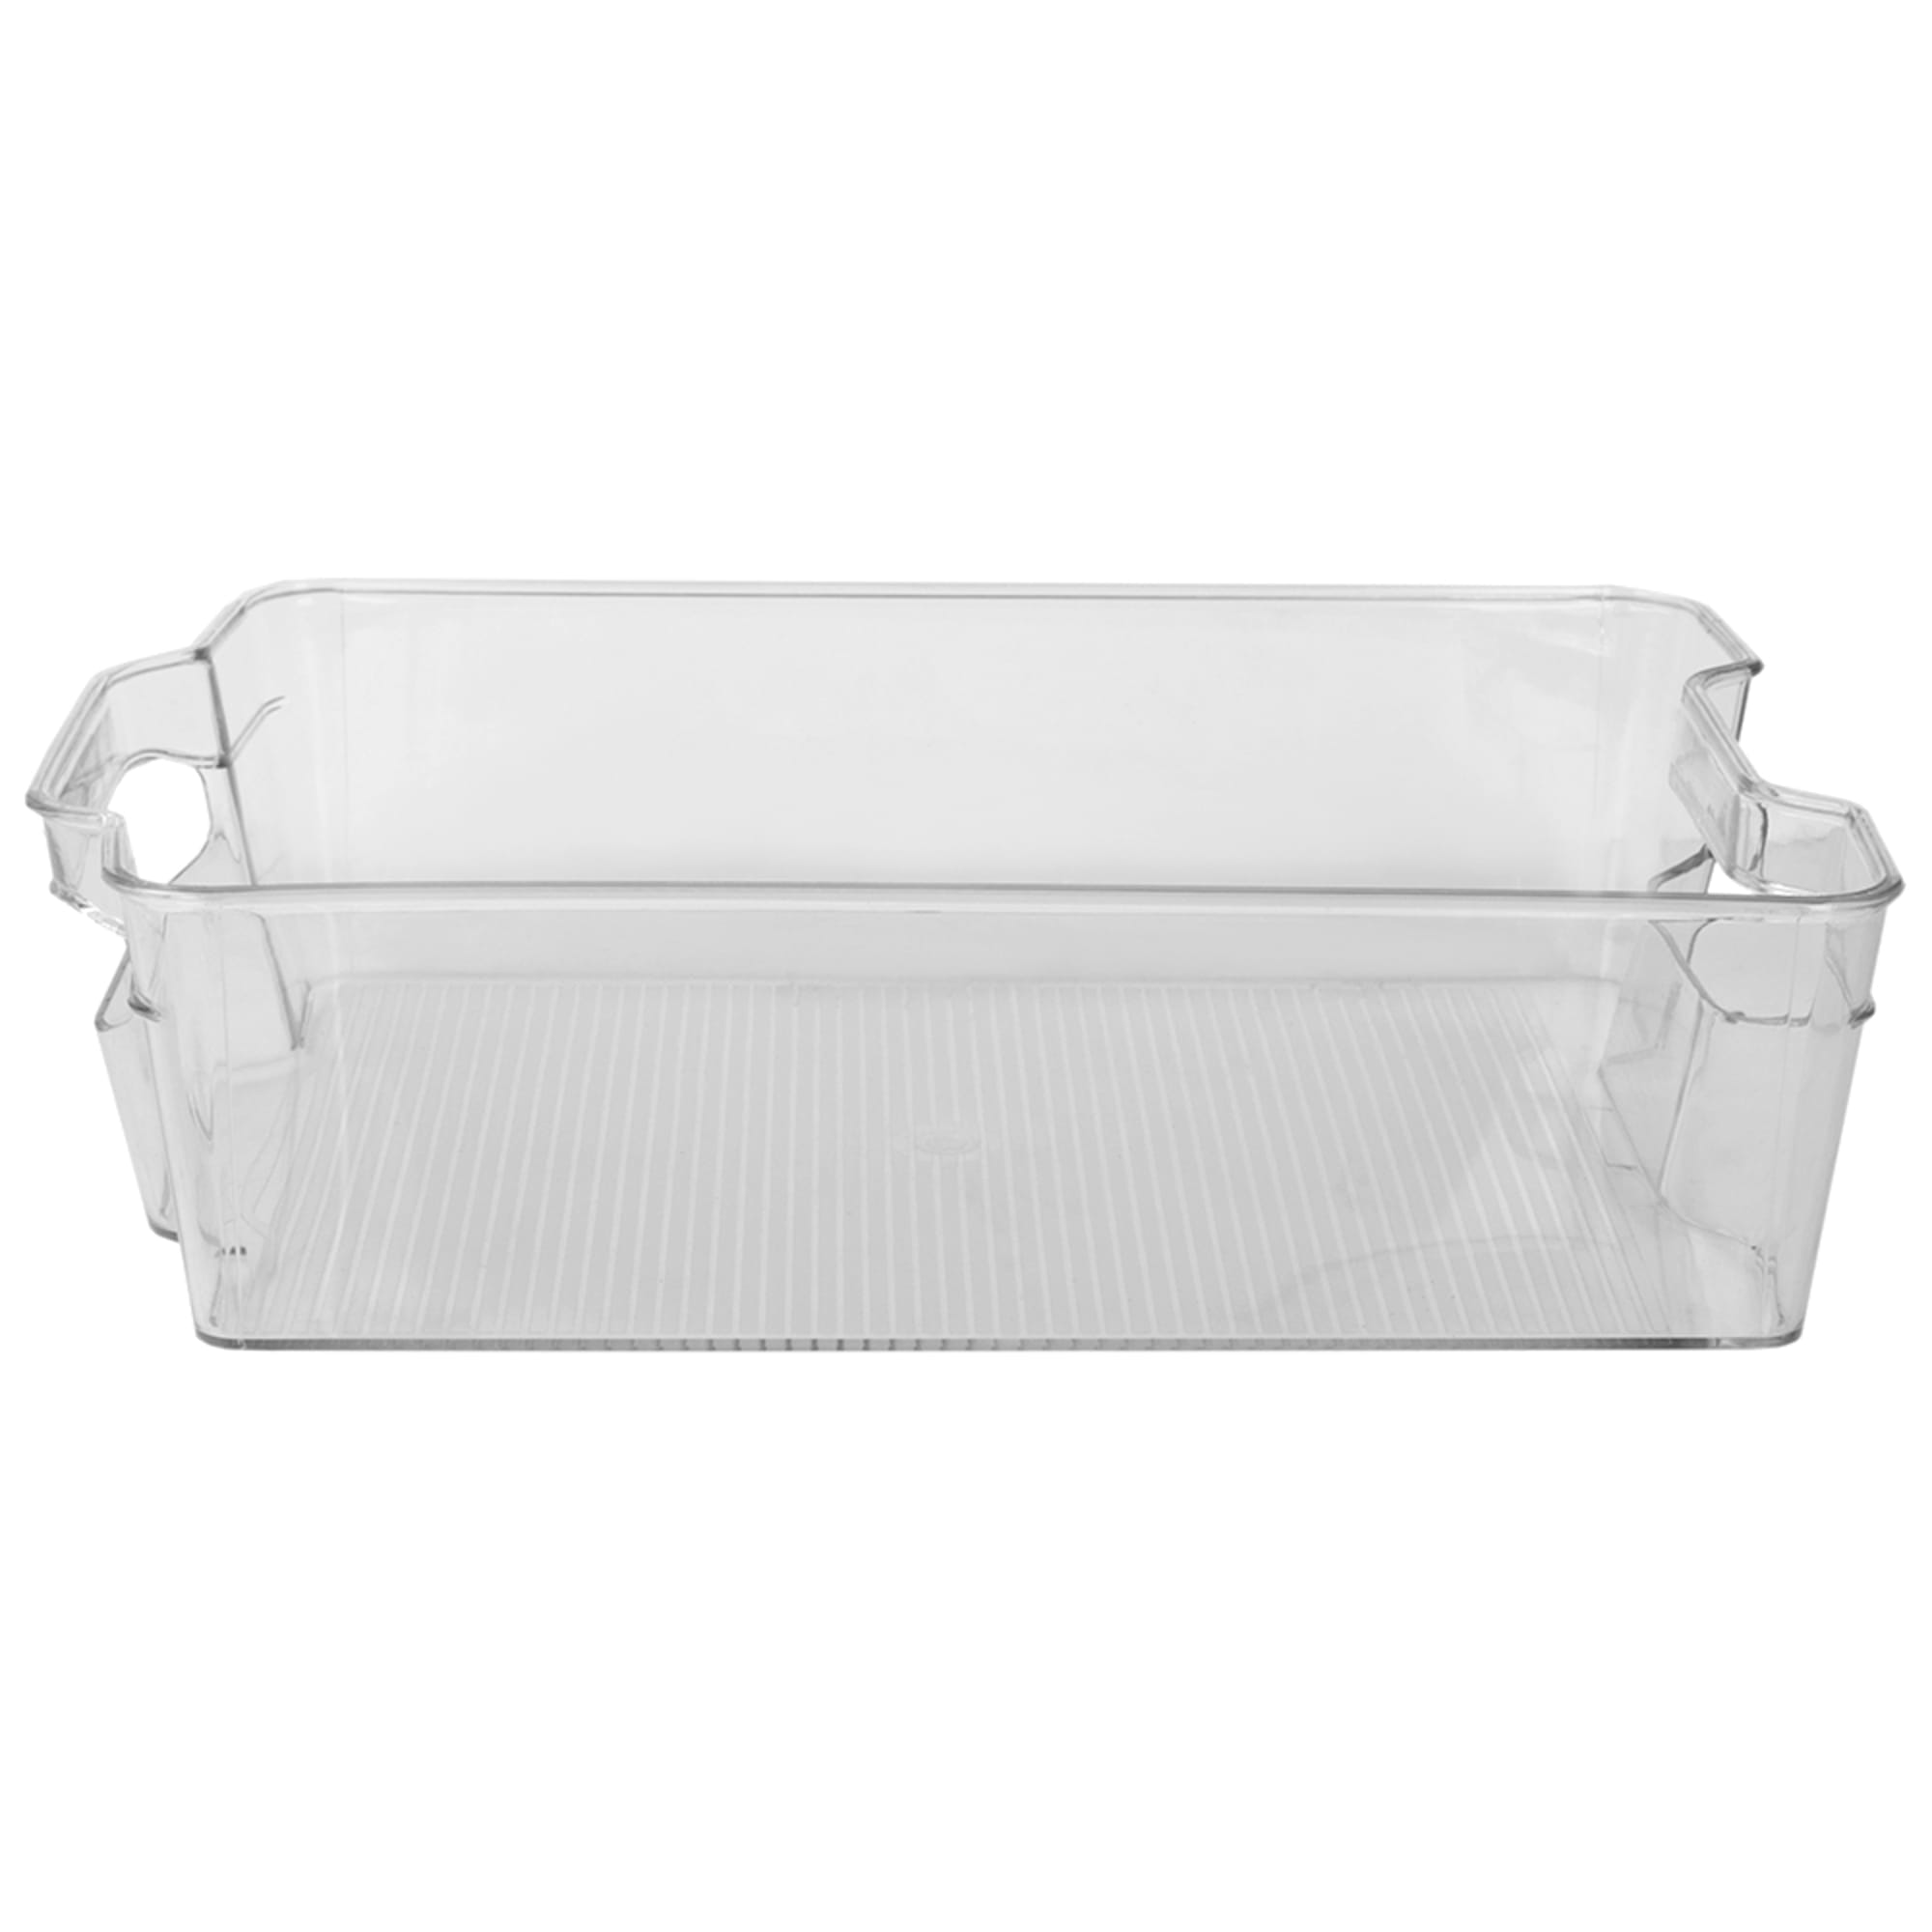 Home Basics Stackable Large Plastic Fridge Pantry and Closet Organization Bin with Handles $4.00 EACH, CASE PACK OF 12